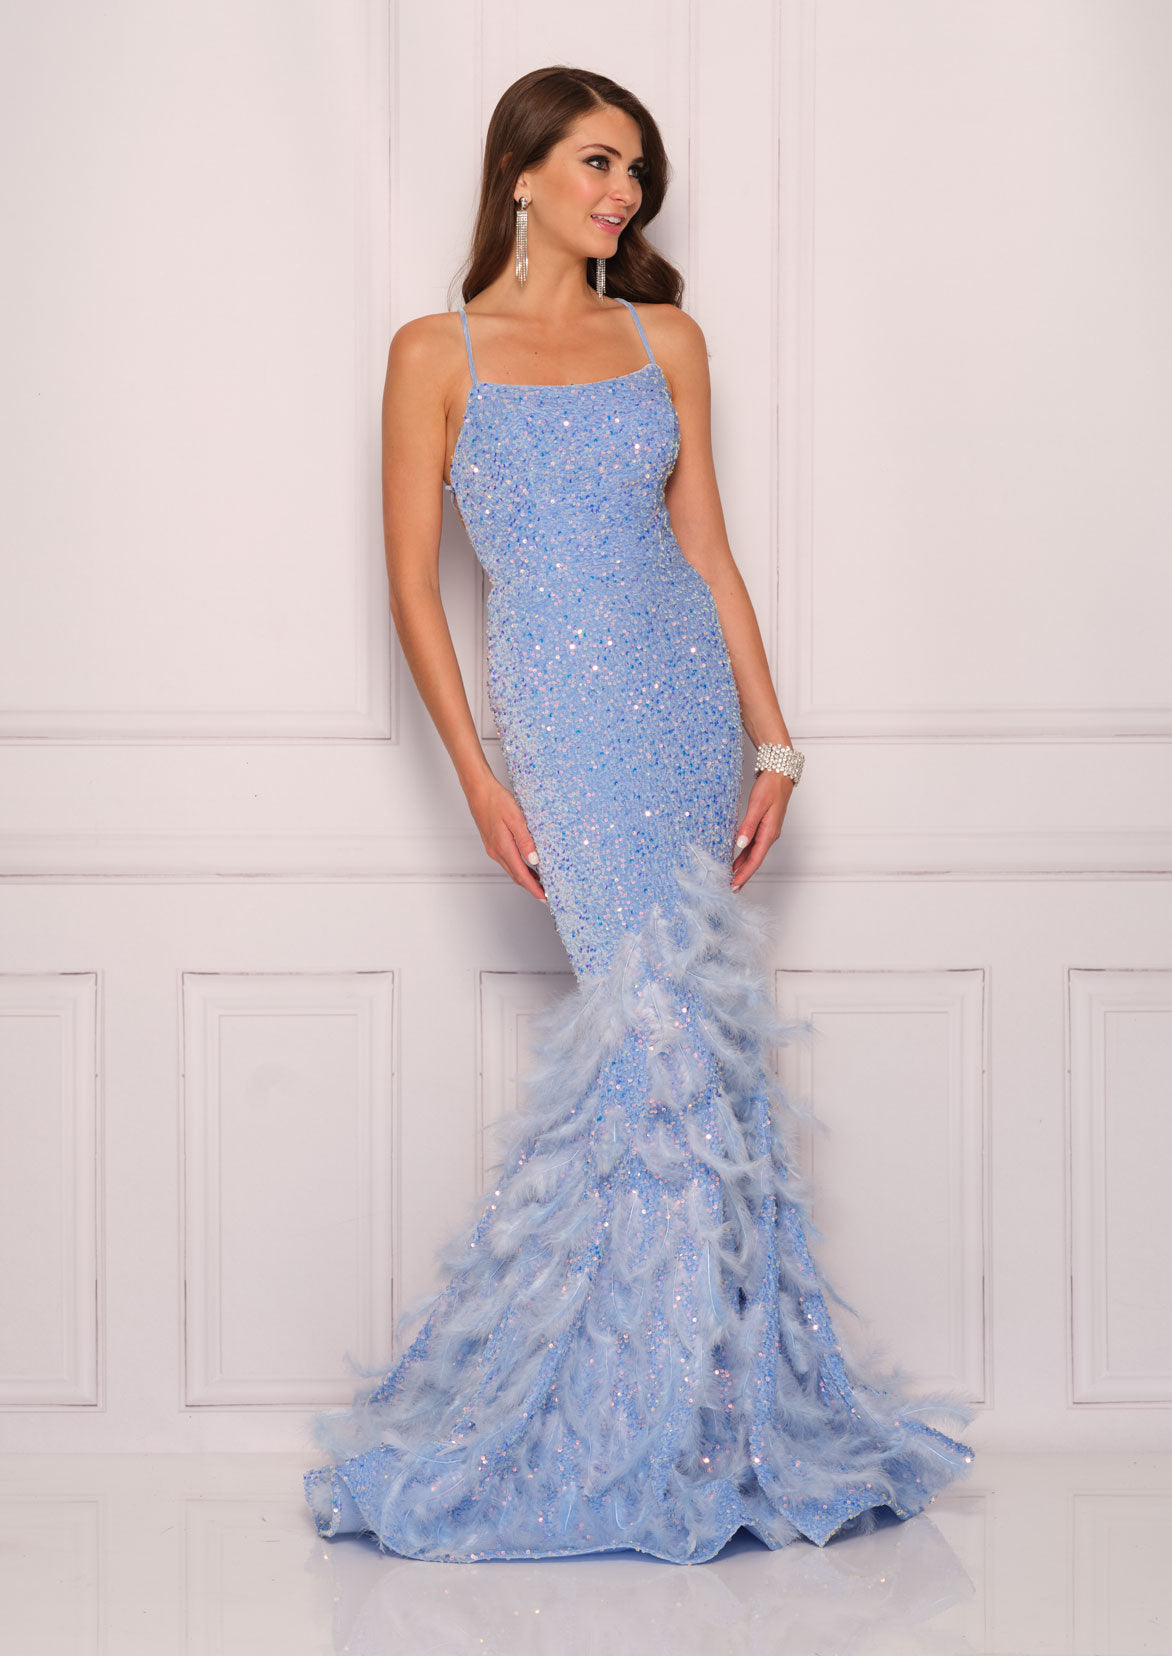 Dave & Johnny 11068 Long Fitted Sequin Feather Mermaid Prom Dress Backless Corset Gown  Sizes: 00-16  Colors: Blue